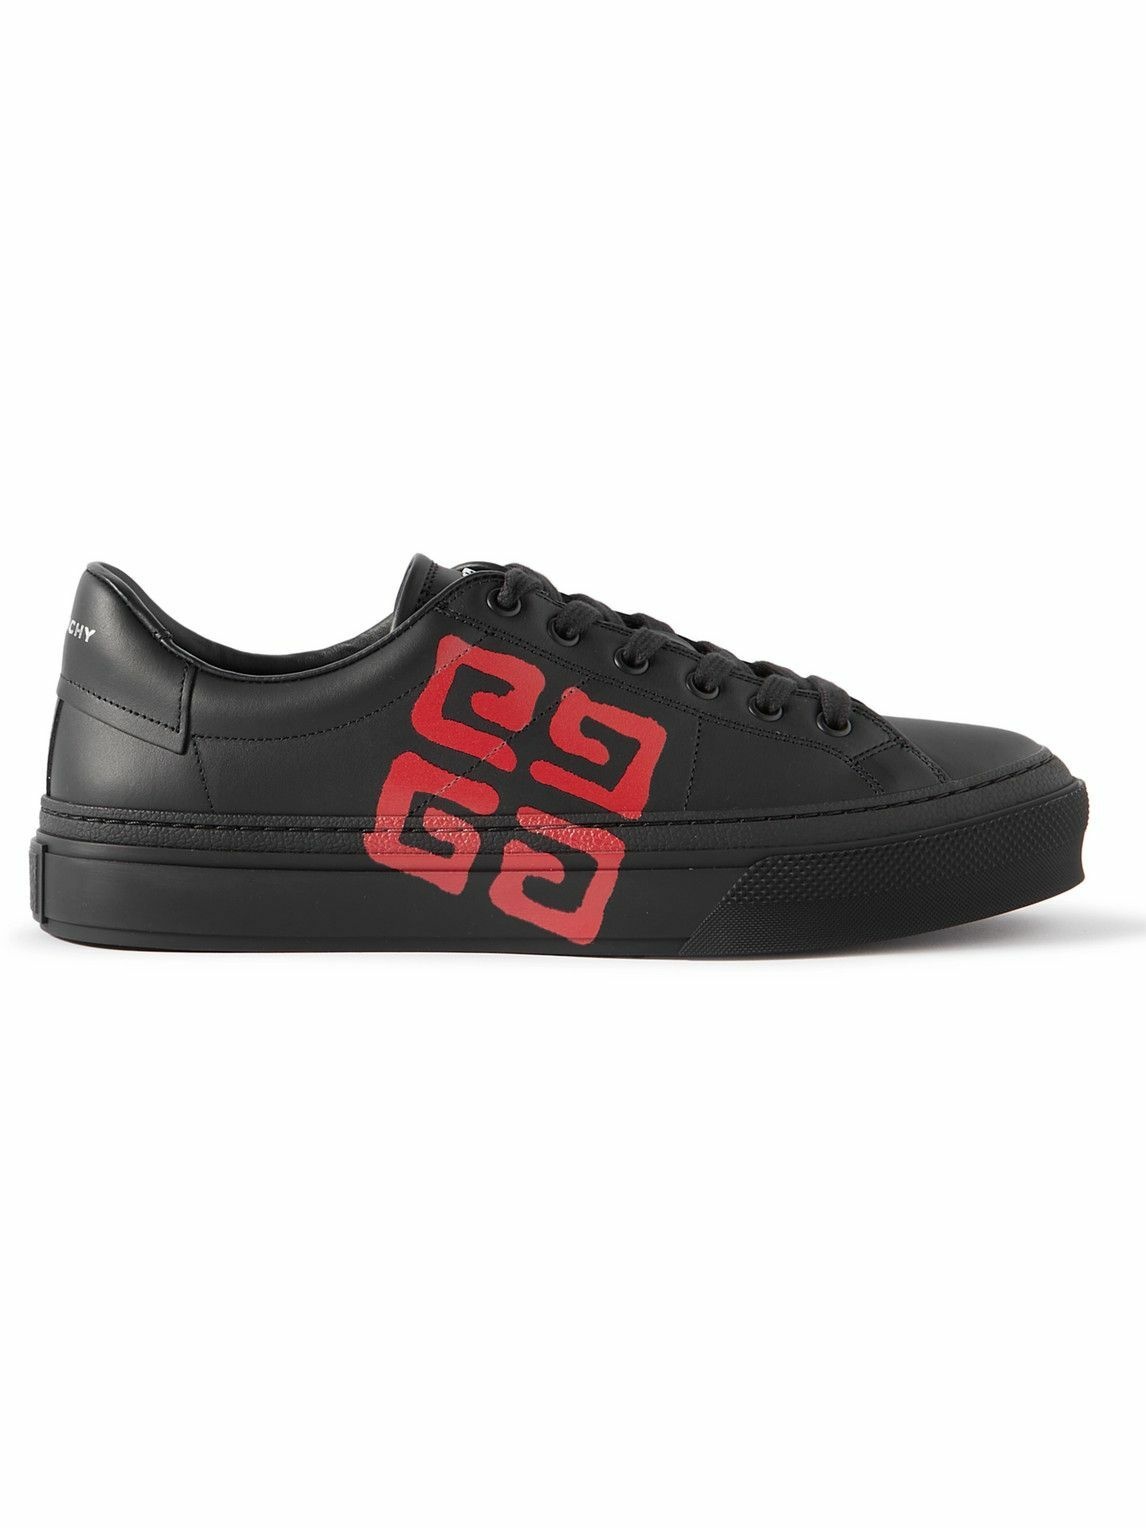 Givenchy - City Sport Logo-Print Leather Sneakers - Black Givenchy